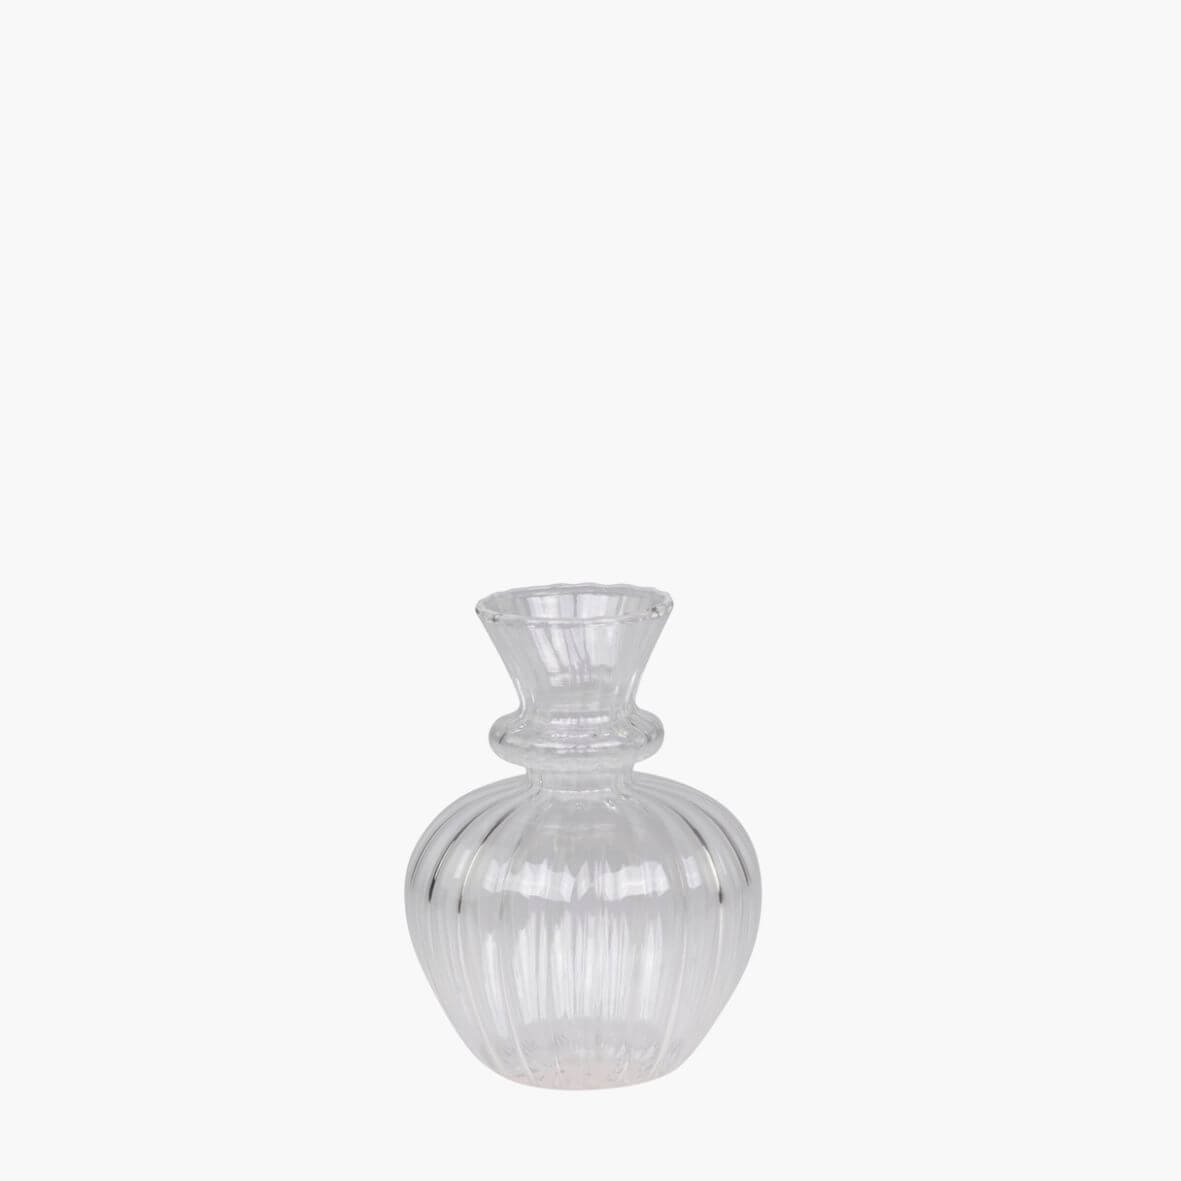 Glass bud vase with etched design on white background